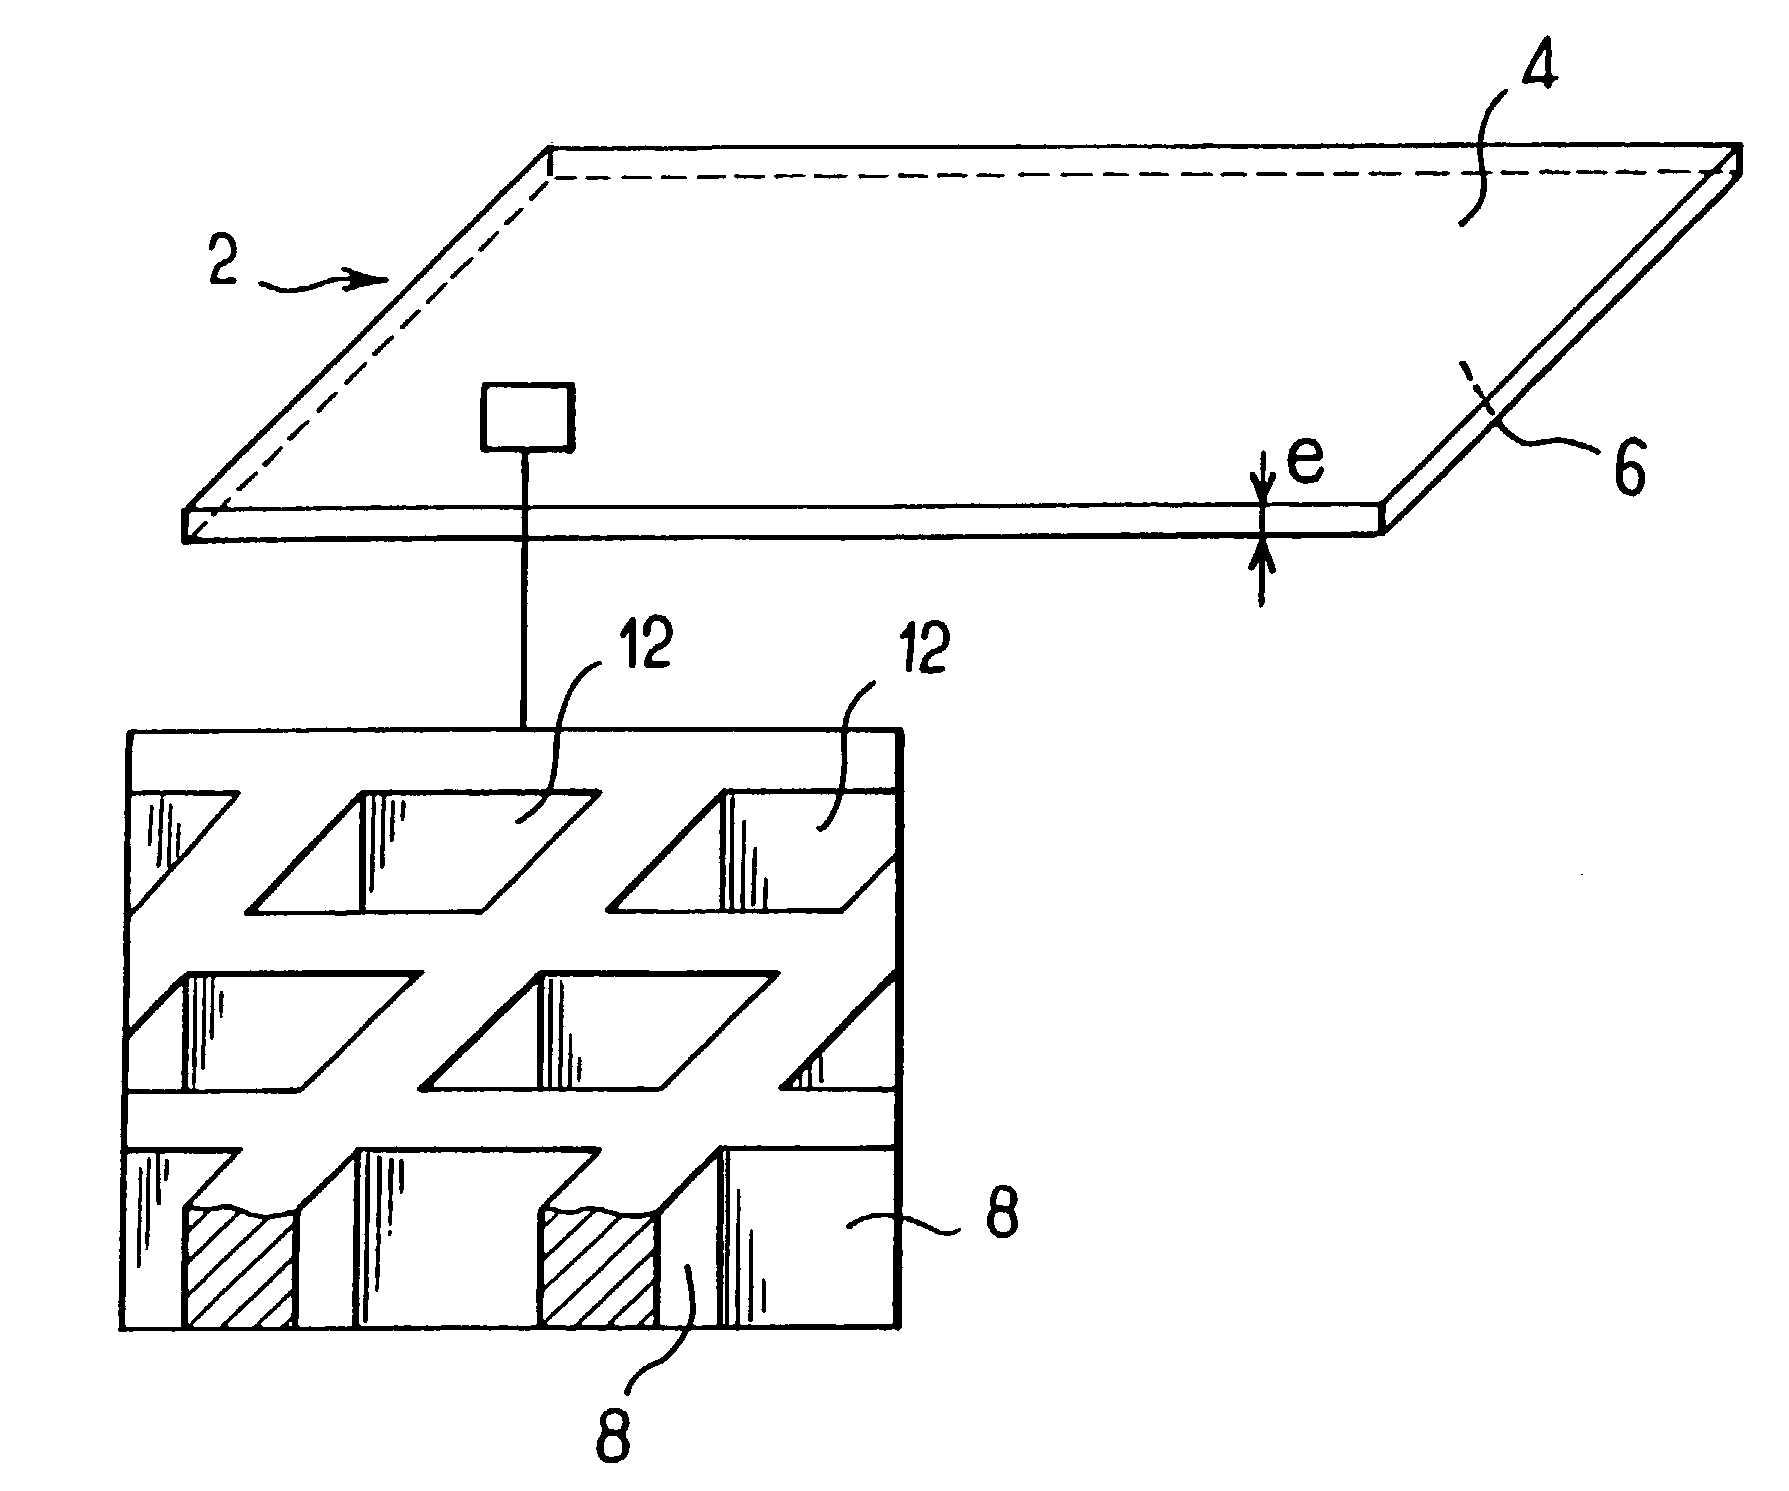 Antiscattering grid and a method of manufacturing such a grid